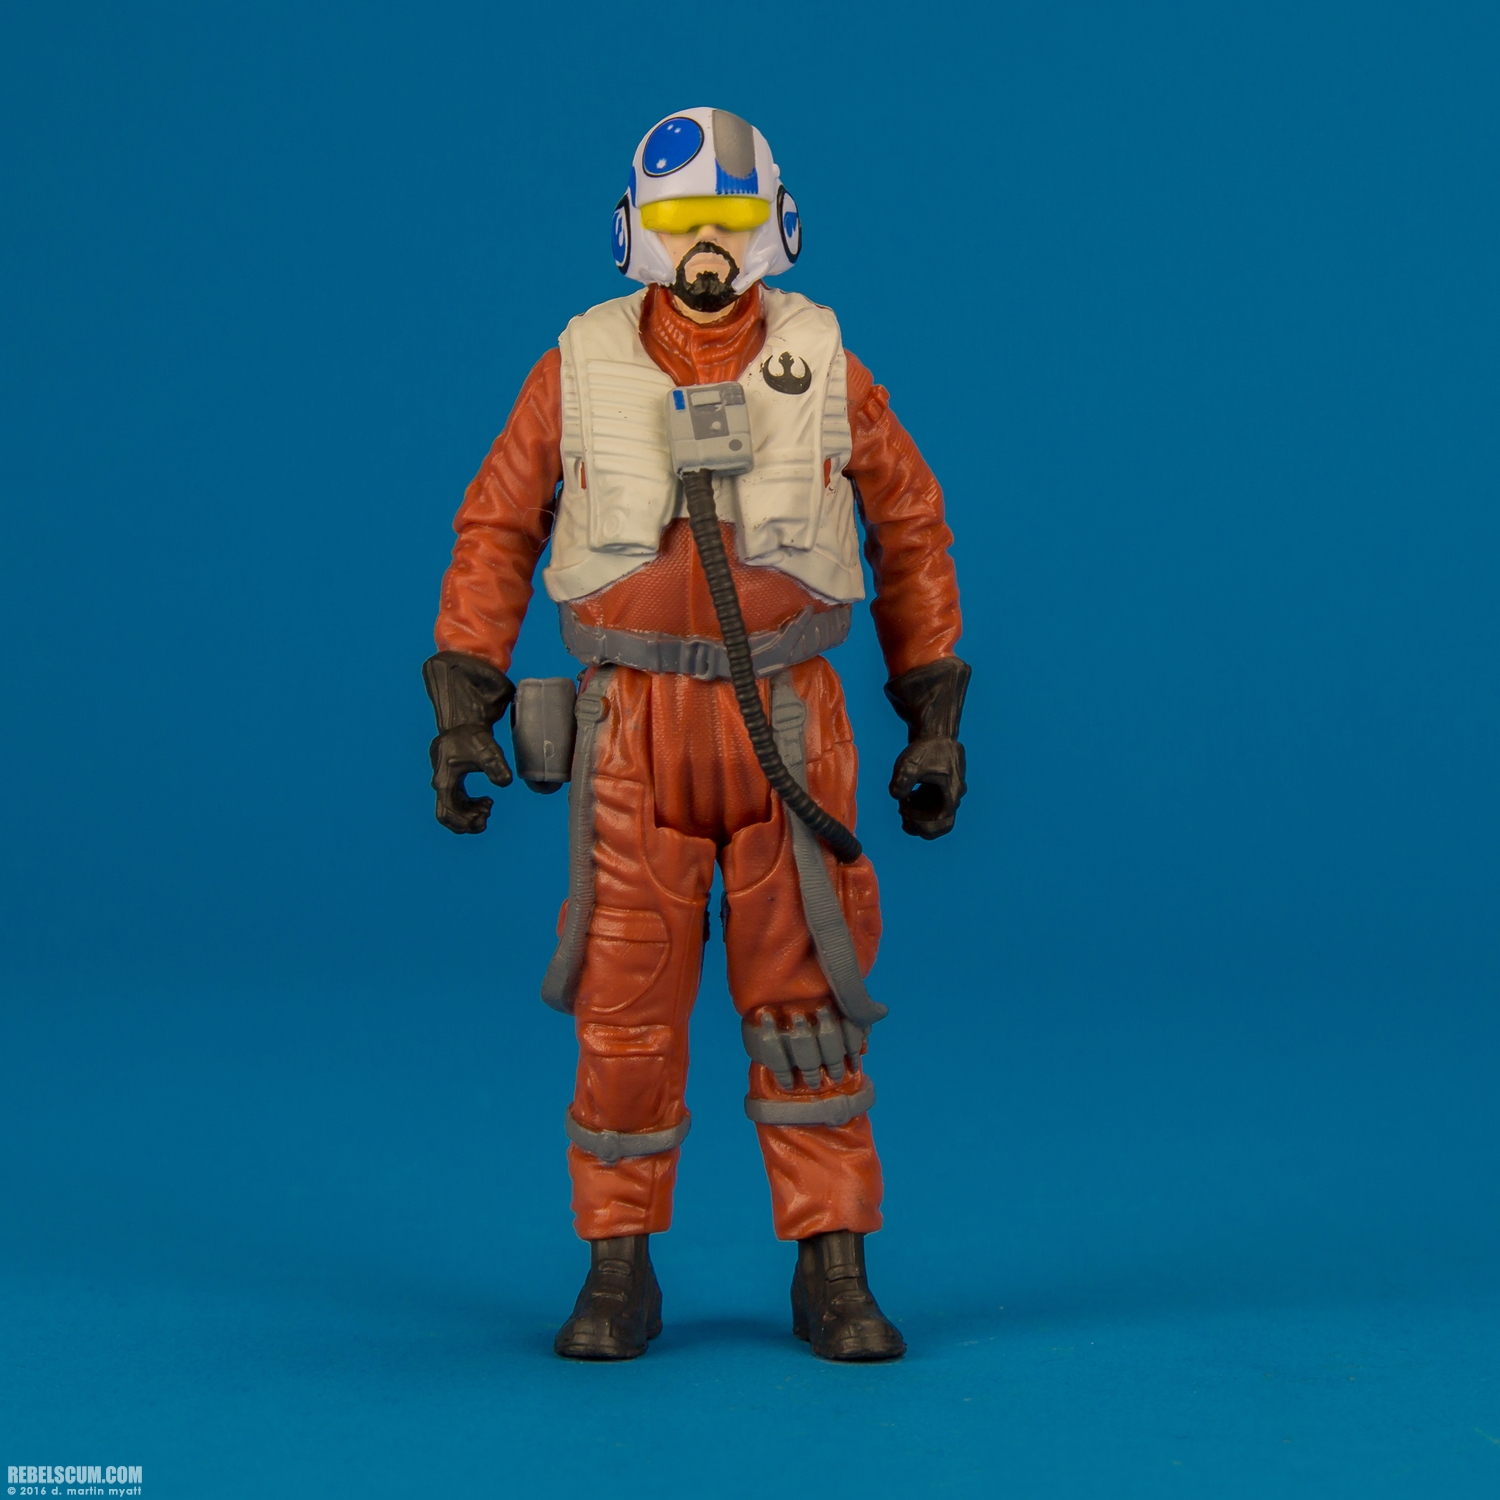 First-Order-Snowtrooper-Officer-Snap-Wexley-The-Force-Awakens-001.jpg